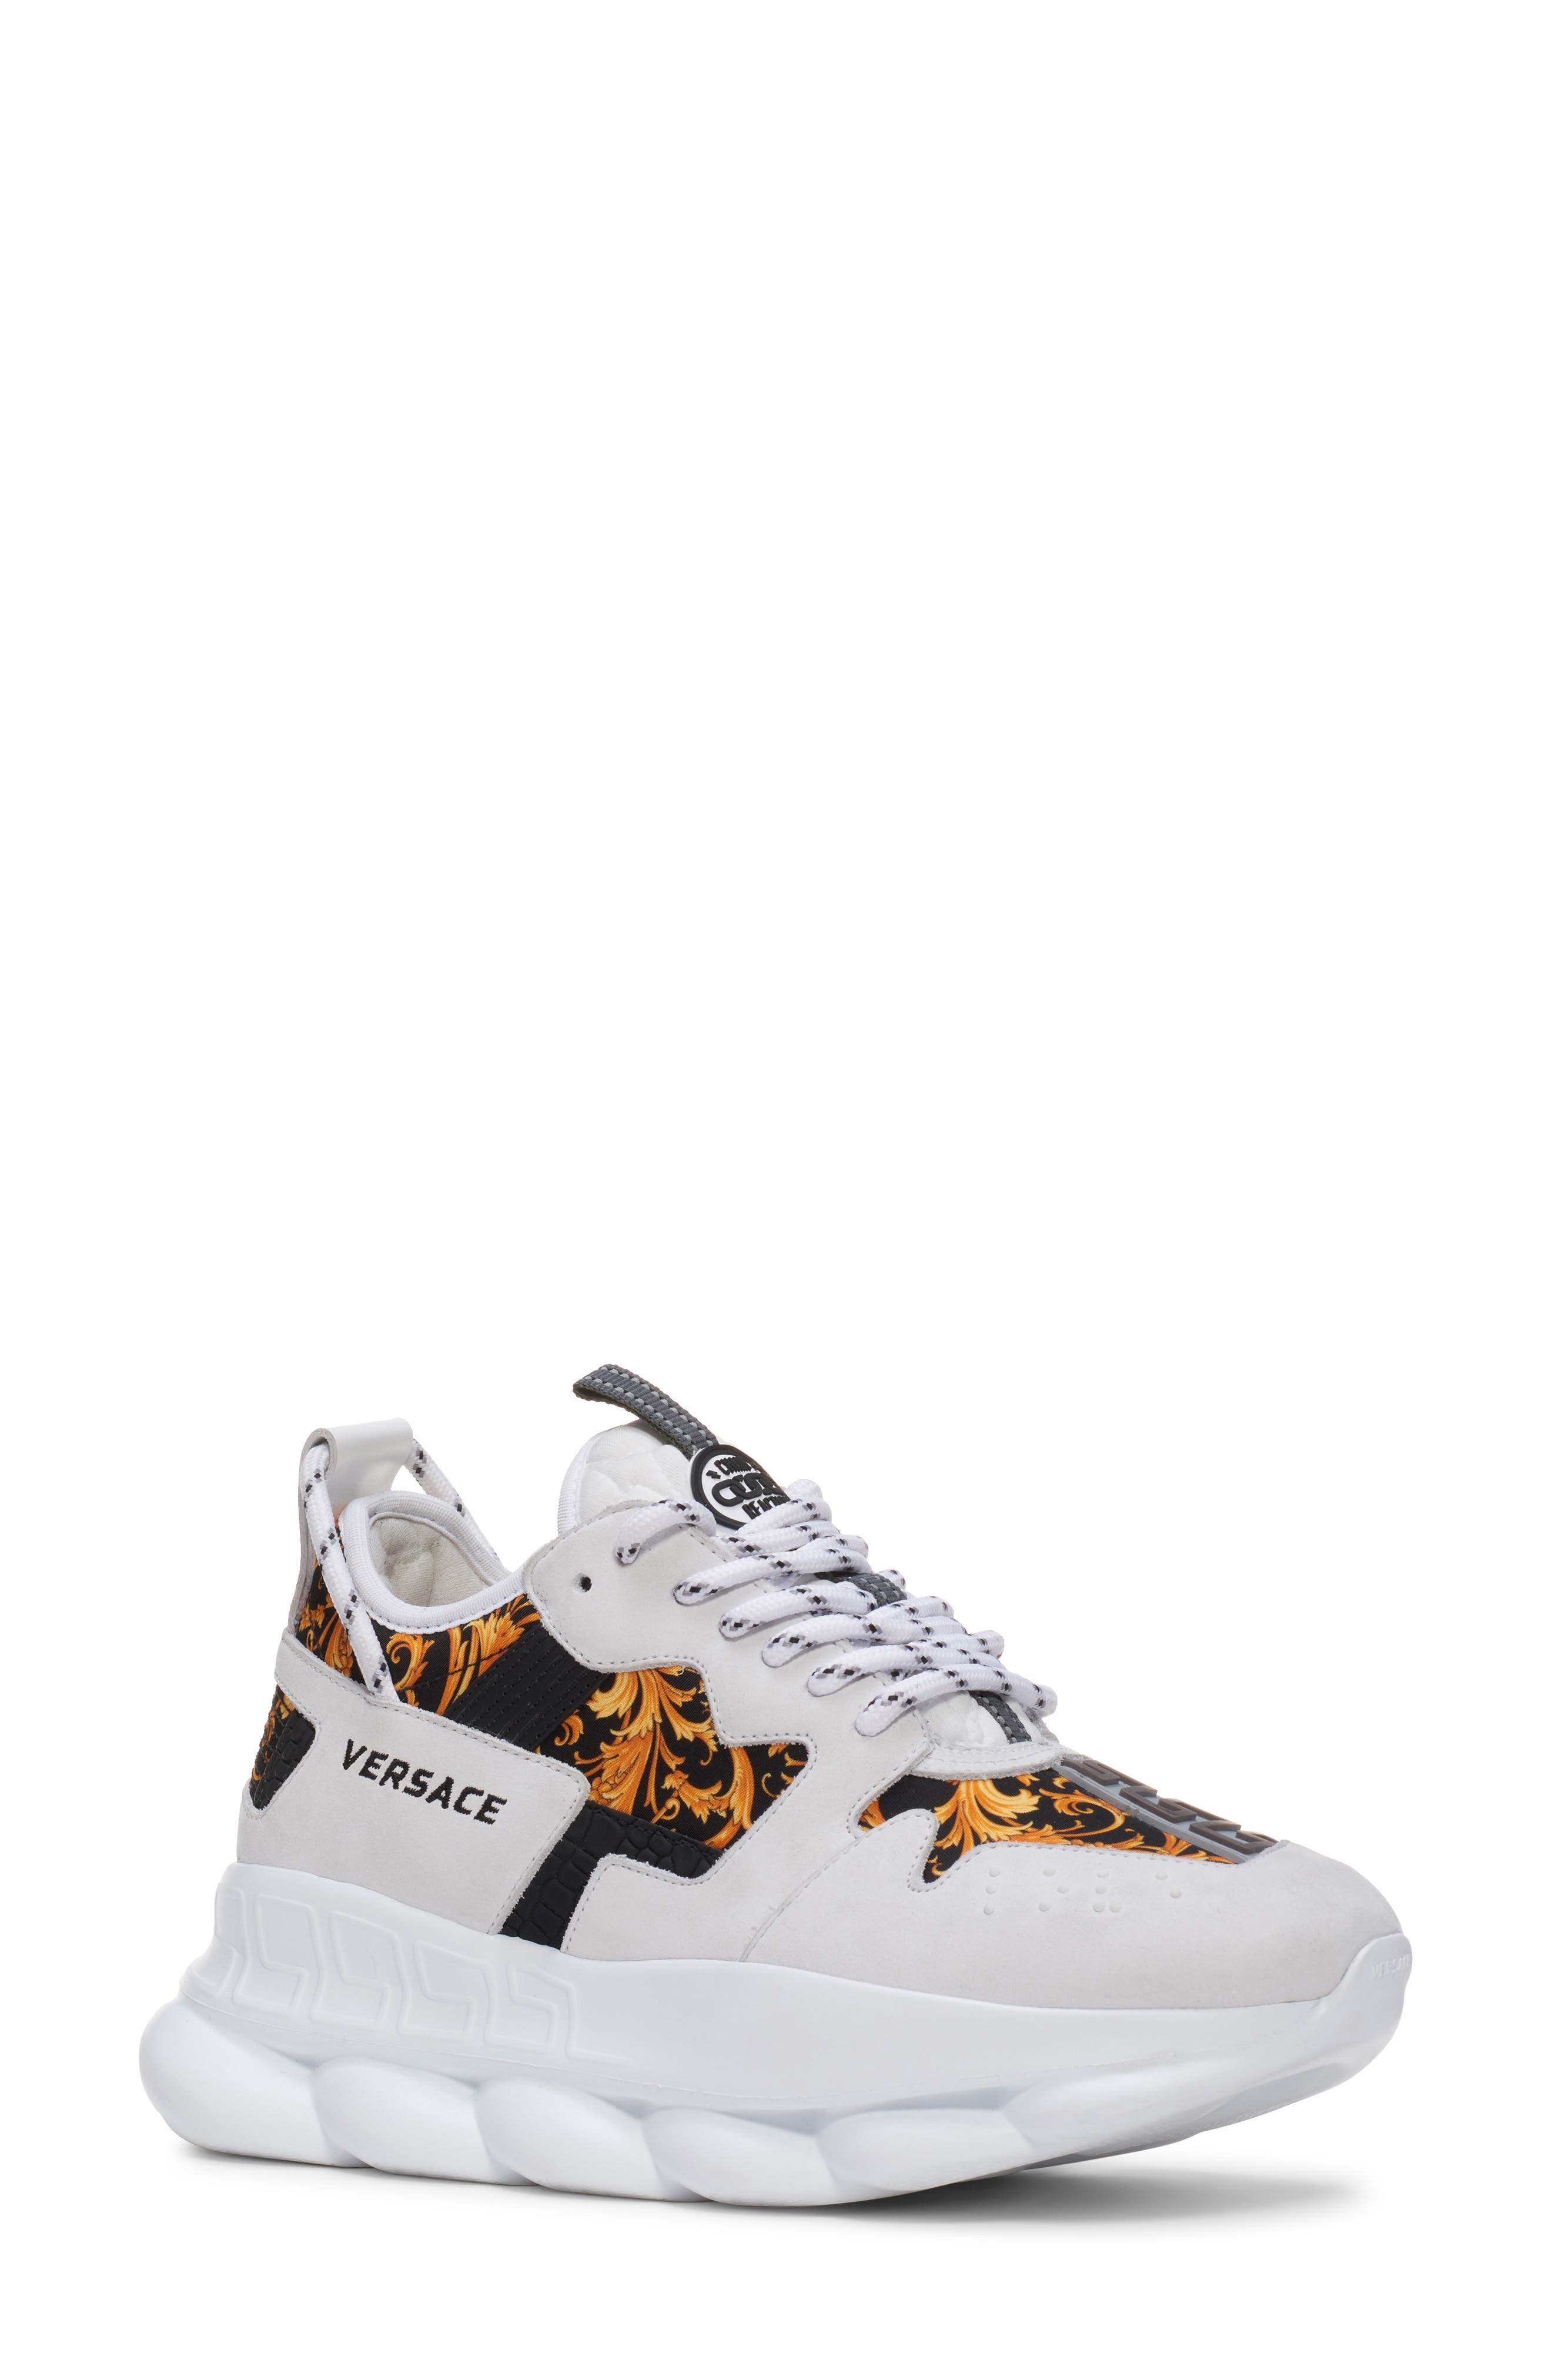 Women's White Versace Shoes | Nordstrom